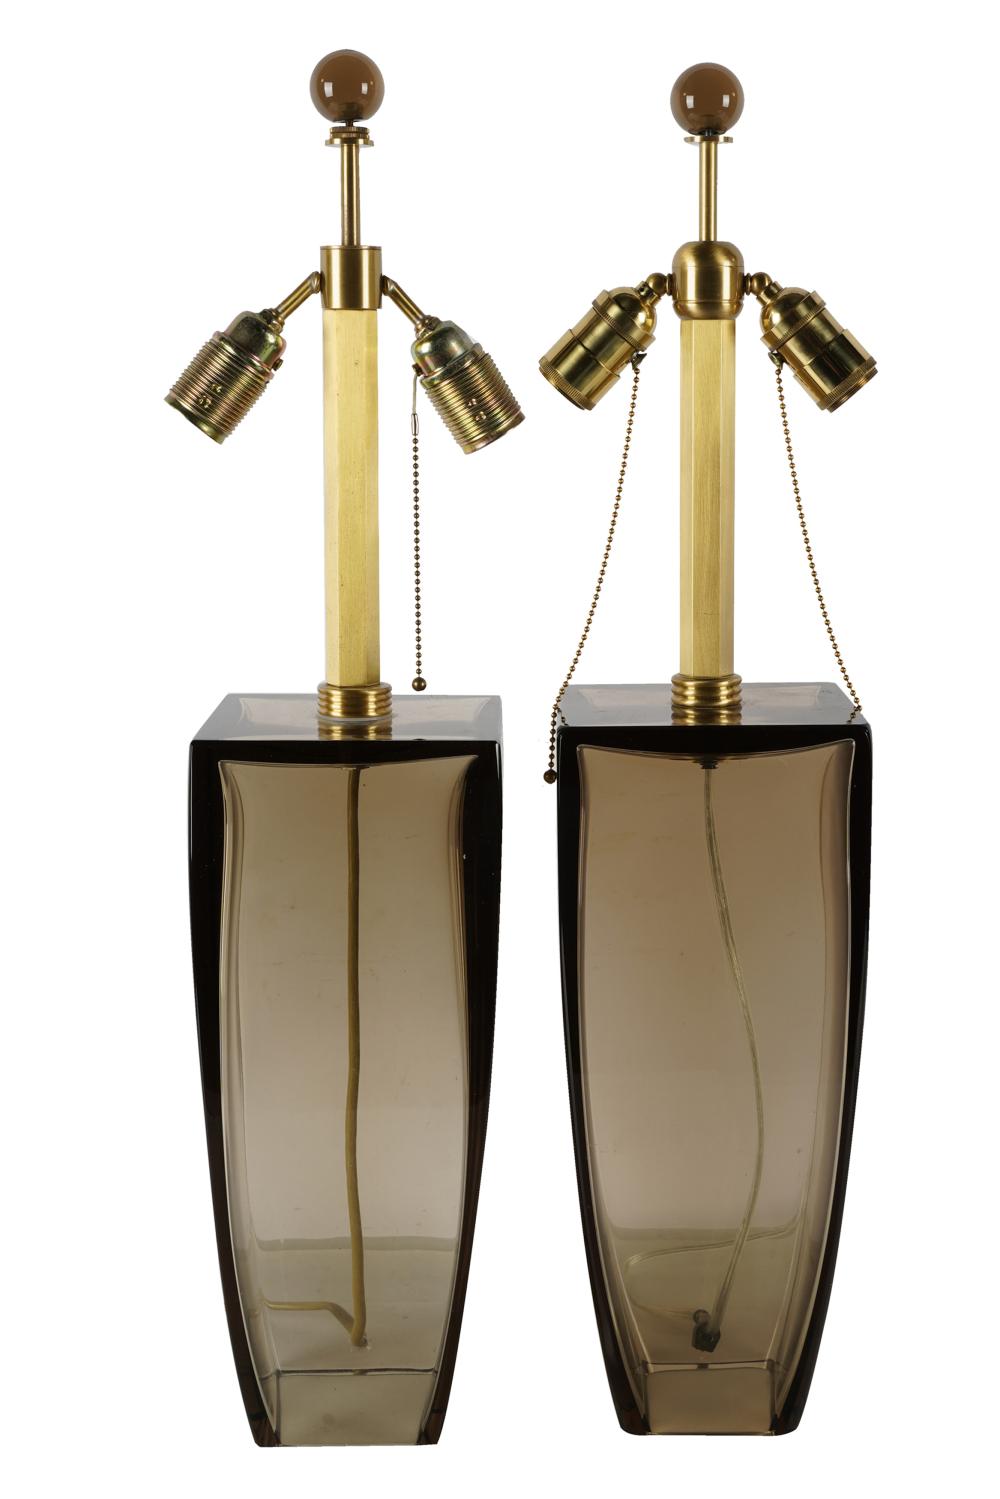 PAIR OF SMOKED GLASS TABLE LAMPSof 33373d